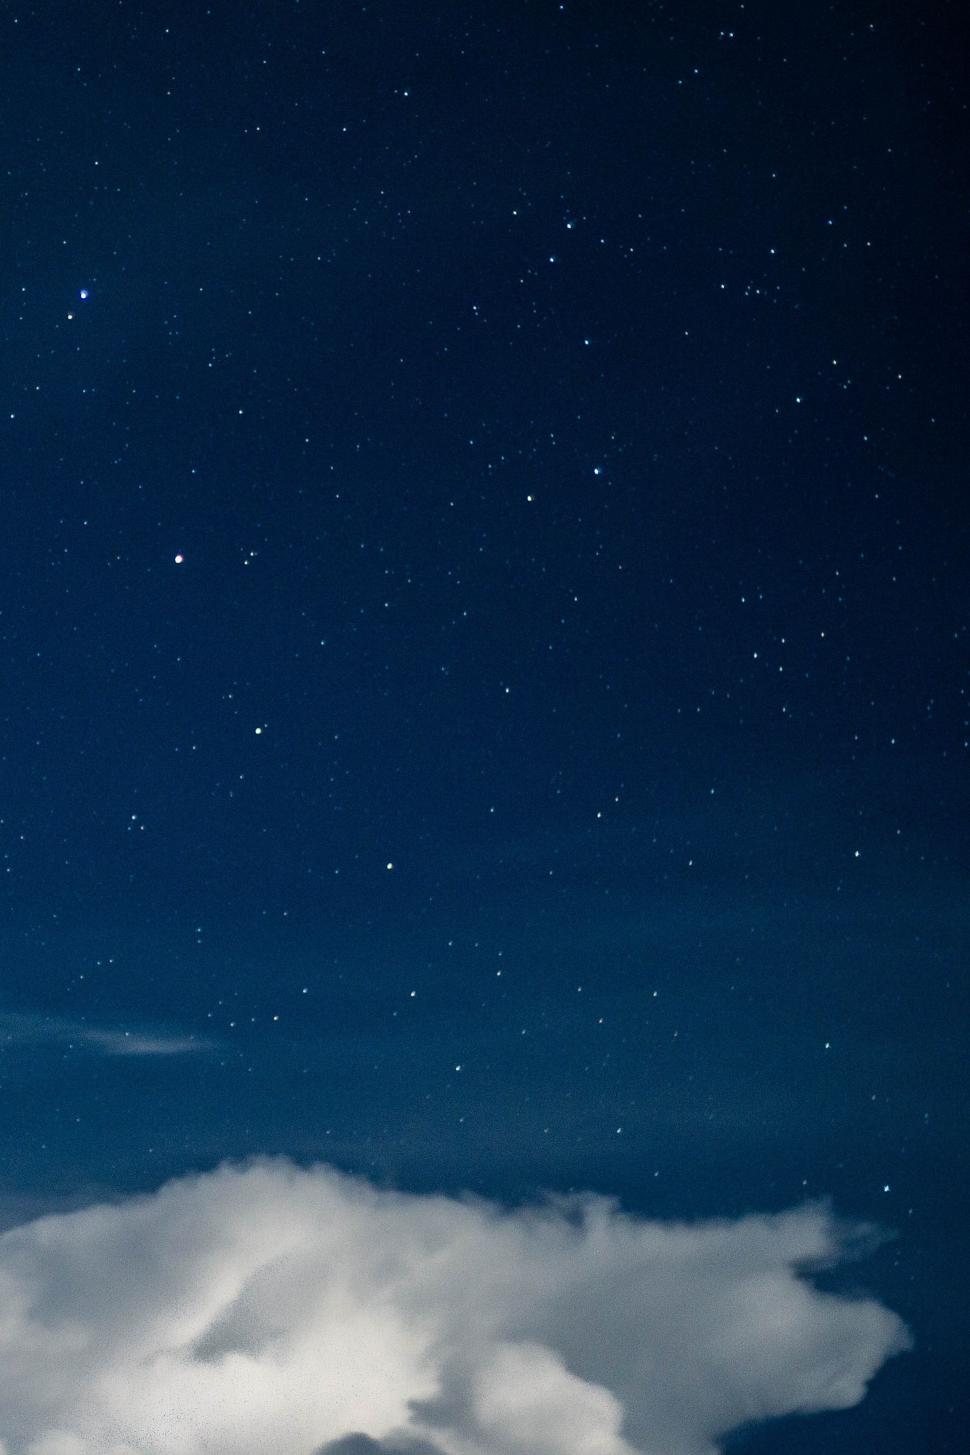 Free Image of Night Sky With Stars and Clouds 